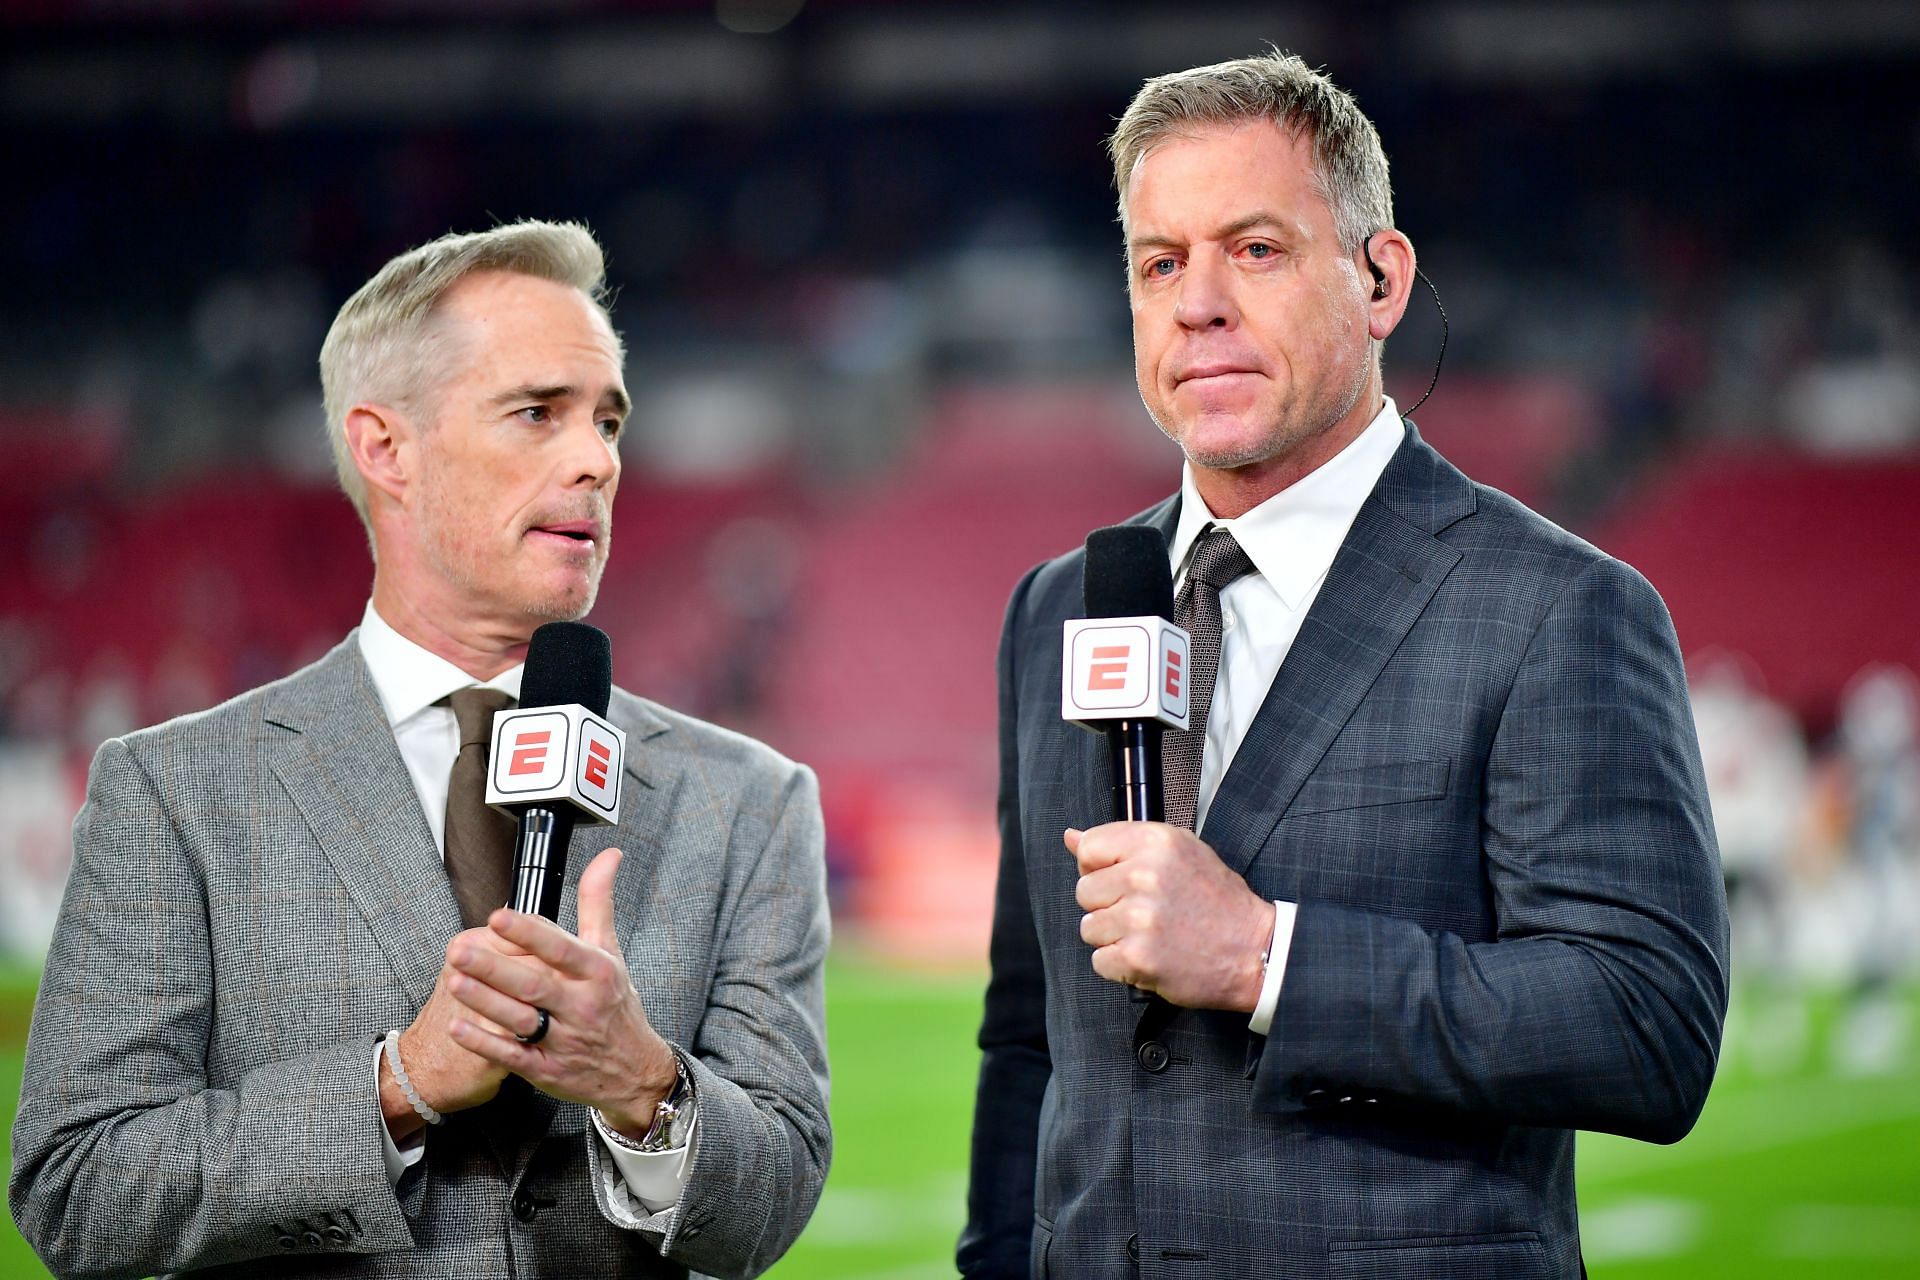 Troy Aikman salary breakdown: How much does ESPN announcer make